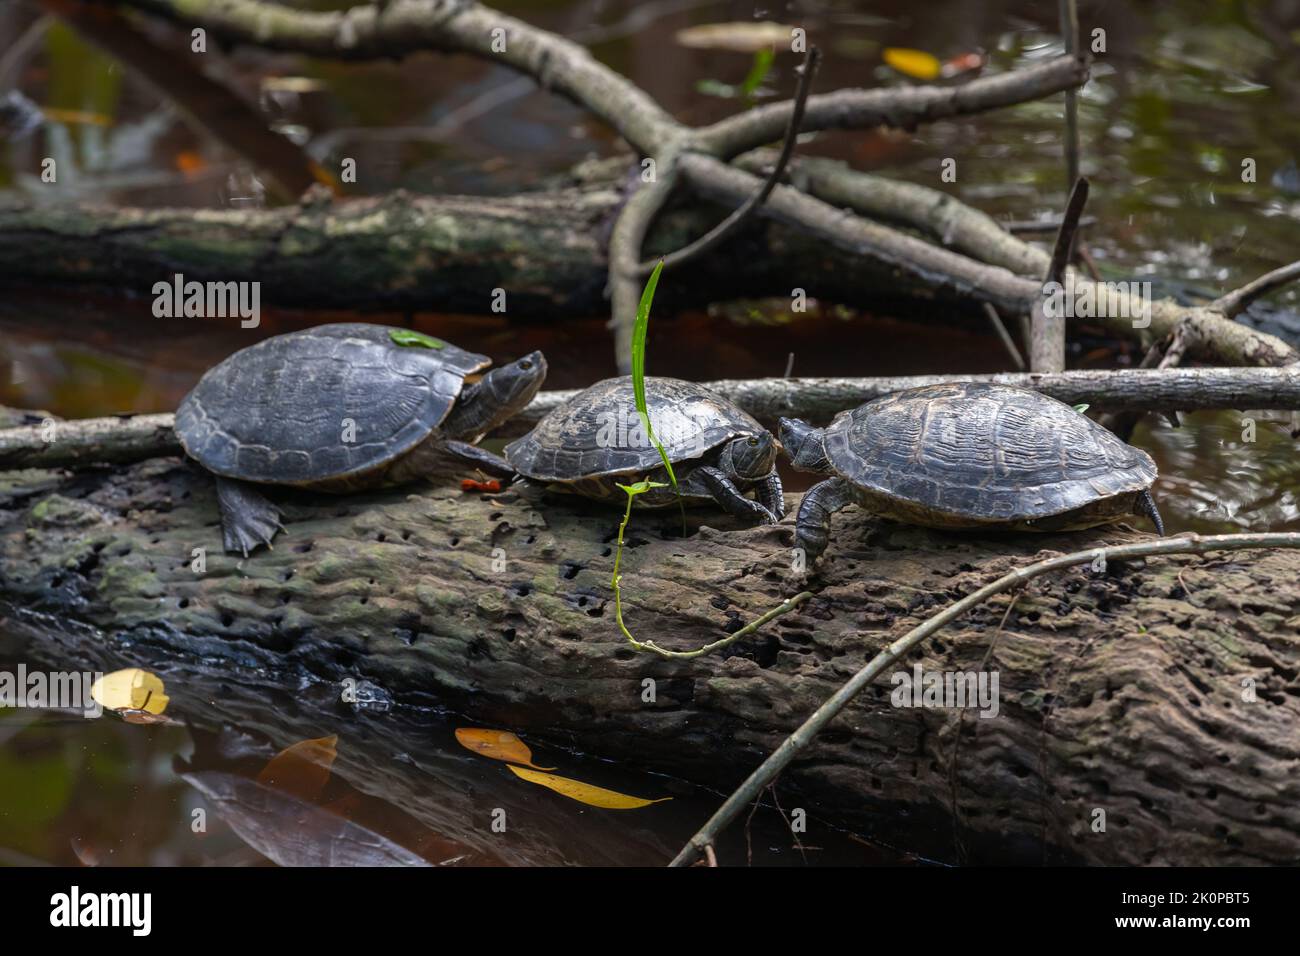 Wild turtles sitting on a tree trunk in a lake Stock Photo